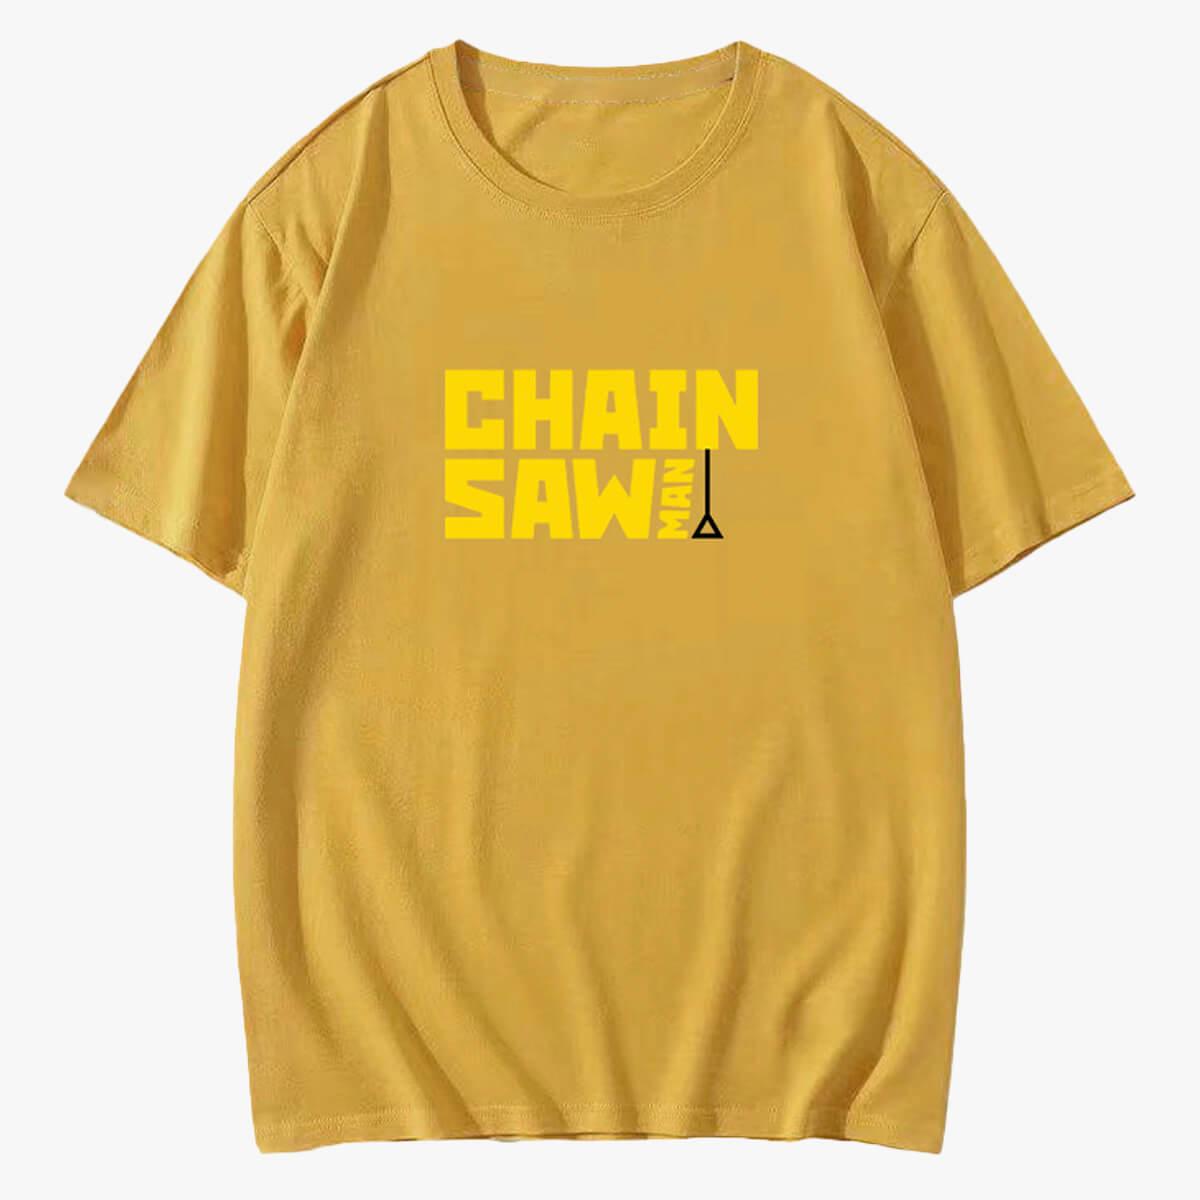 Chainsaw Man Logo Anime Aesthetic T-Shirt - Aesthetic Clothes Shop